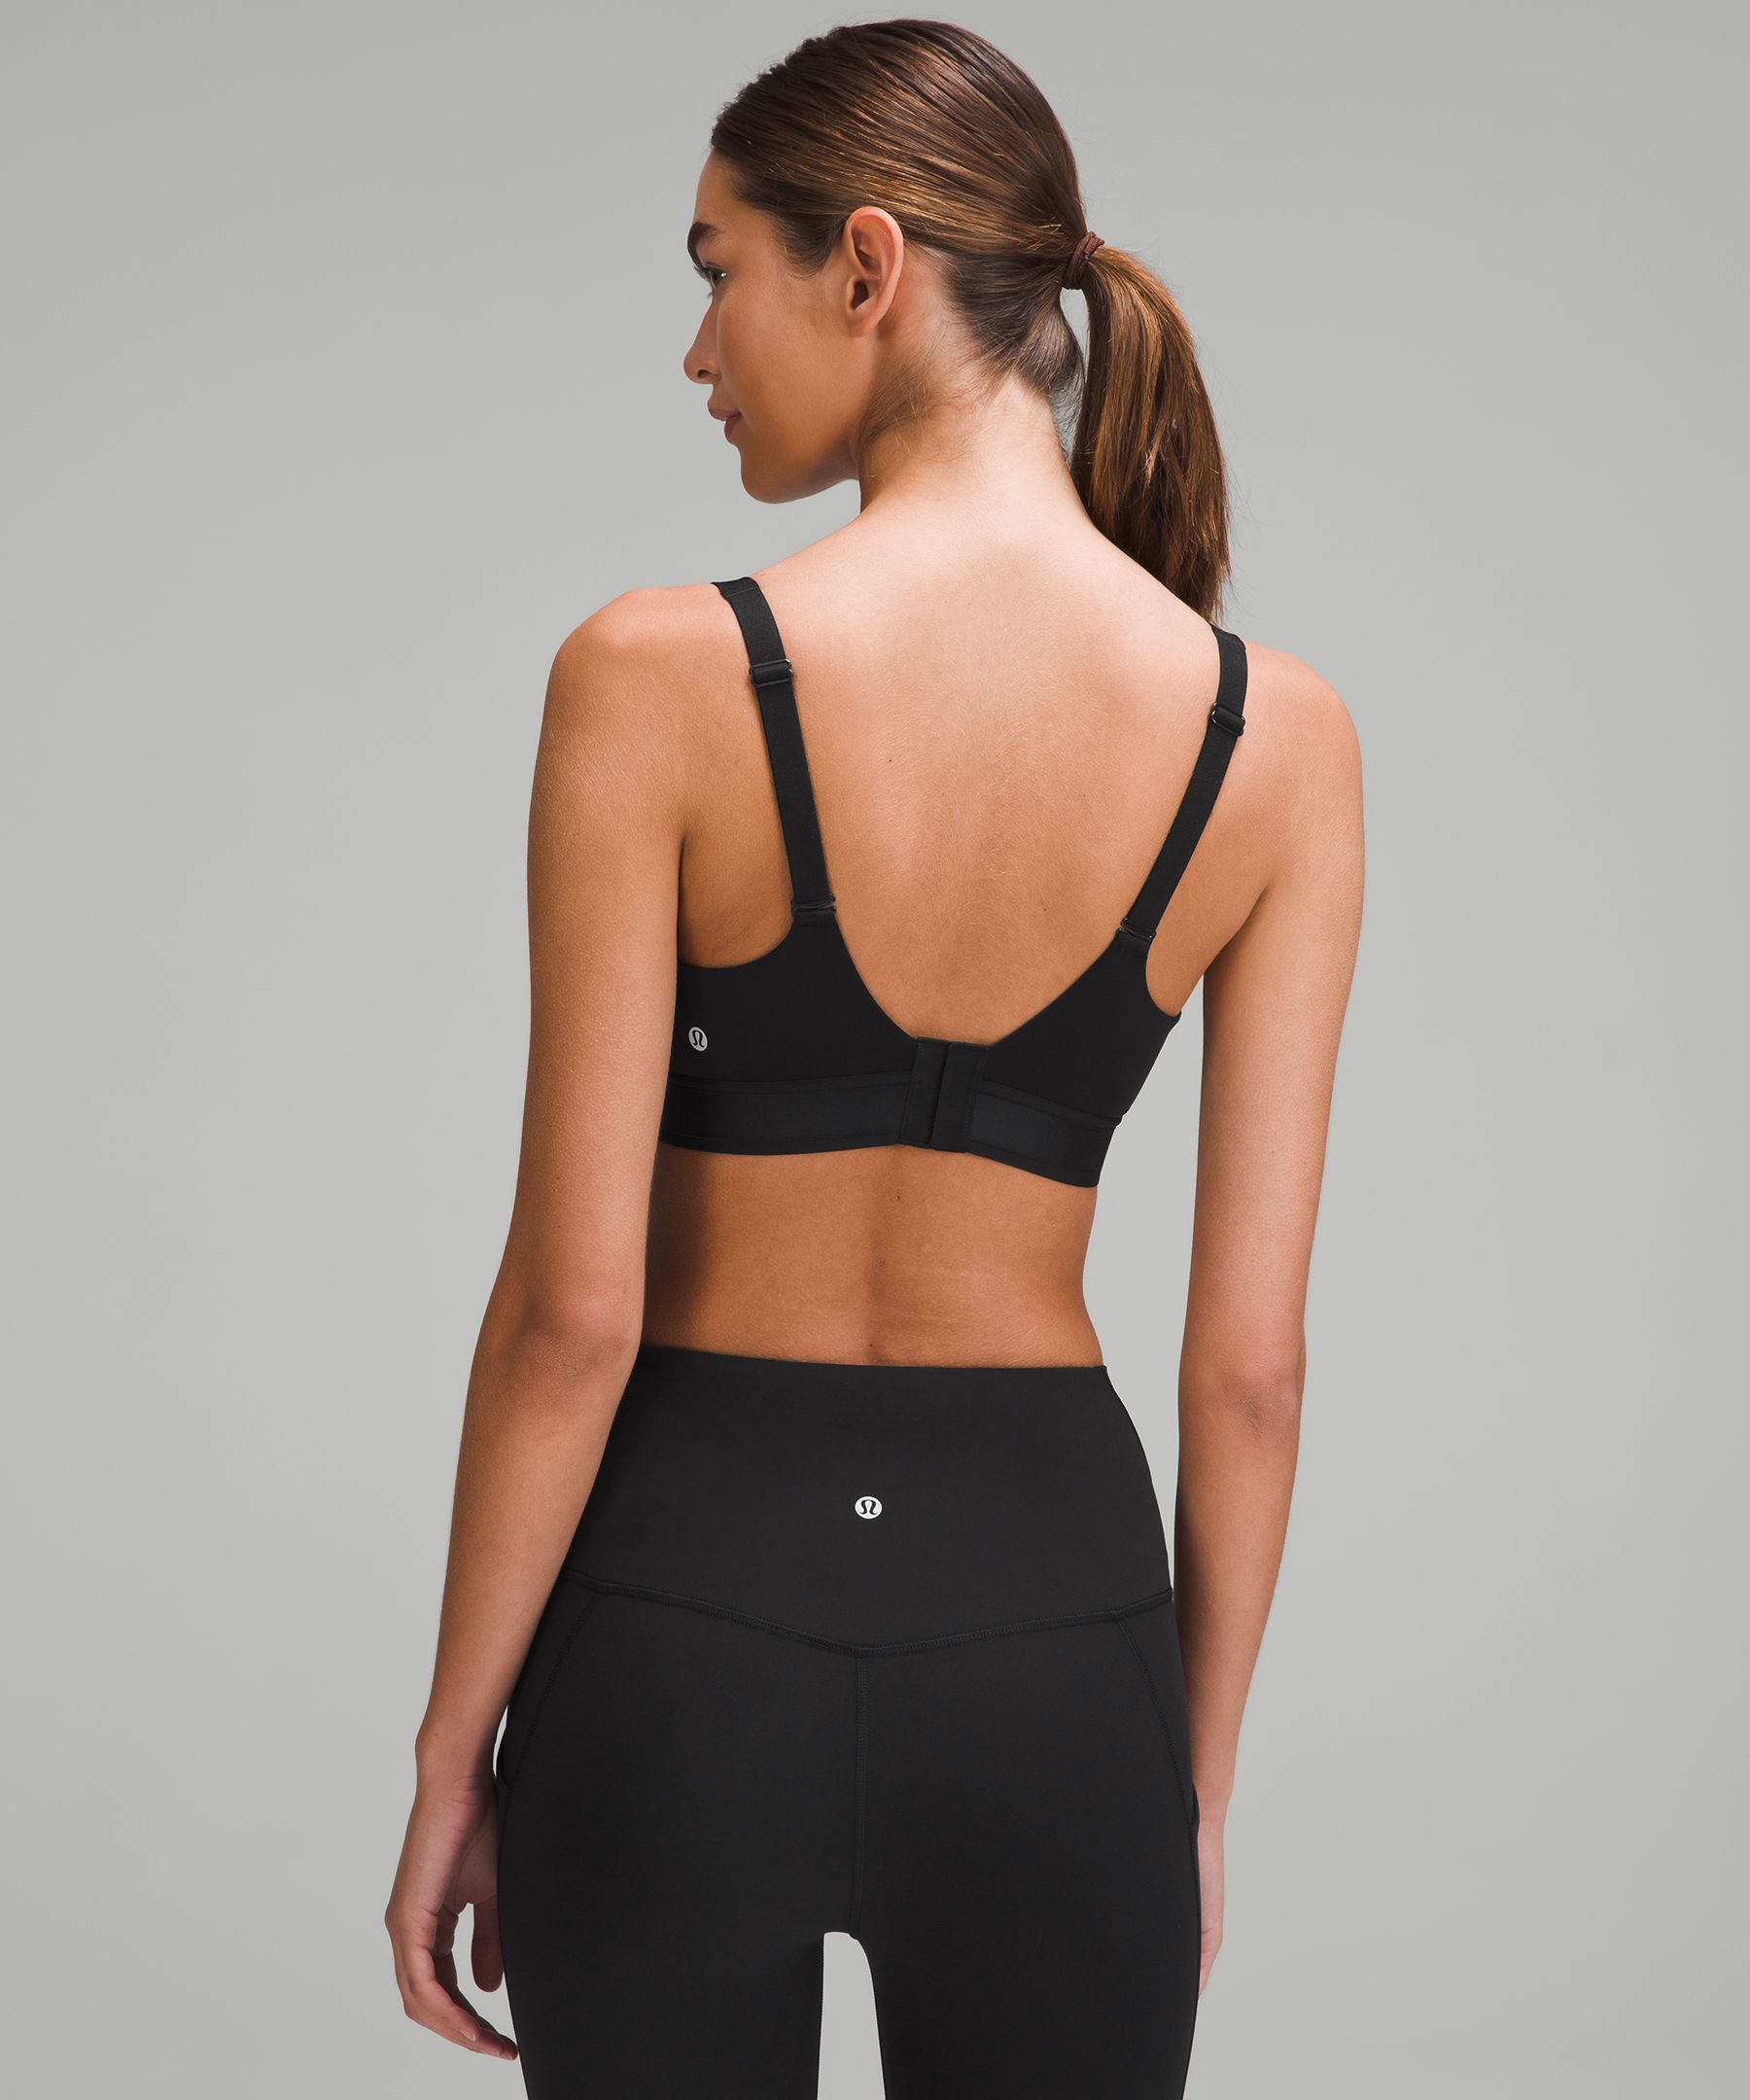 Lululemon Sports Bra Size 4 Multiple - $28 (41% Off Retail) - From kate